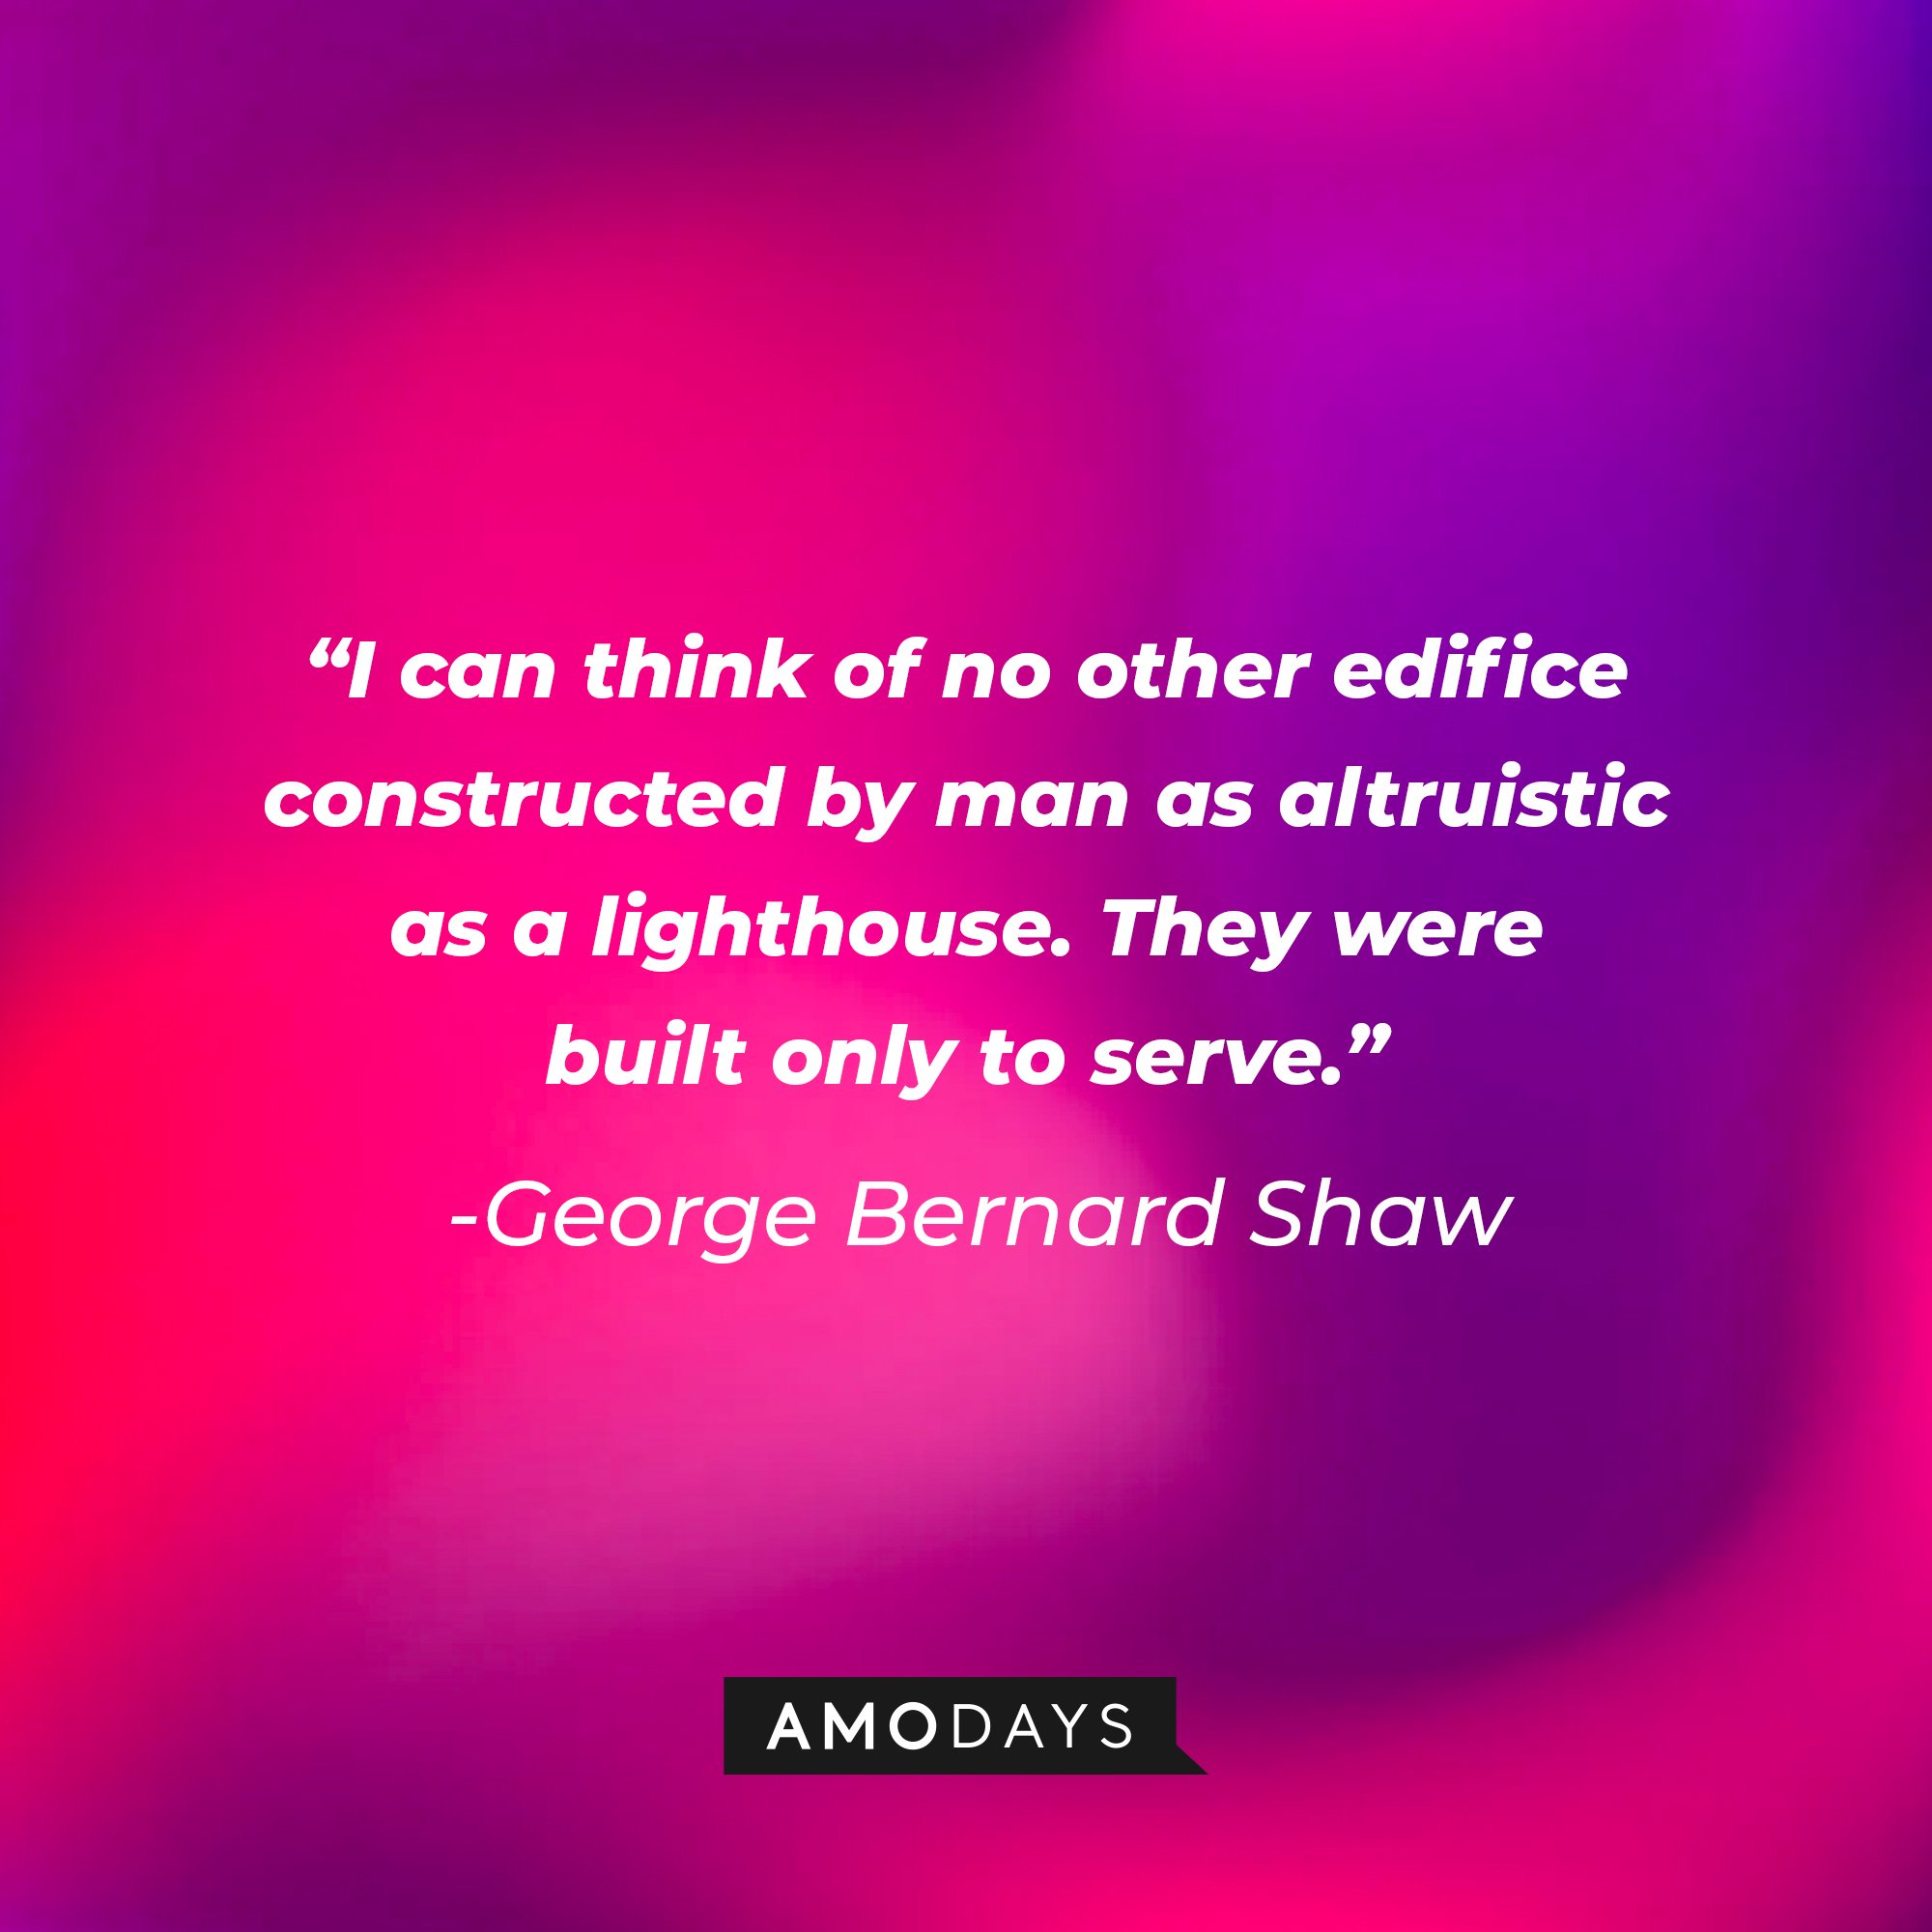 George Bernard Shaw’s quote: “I can think of no other edifice constructed by man as altruistic as a lighthouse. They were built only to serve.” | Image: AmoDays